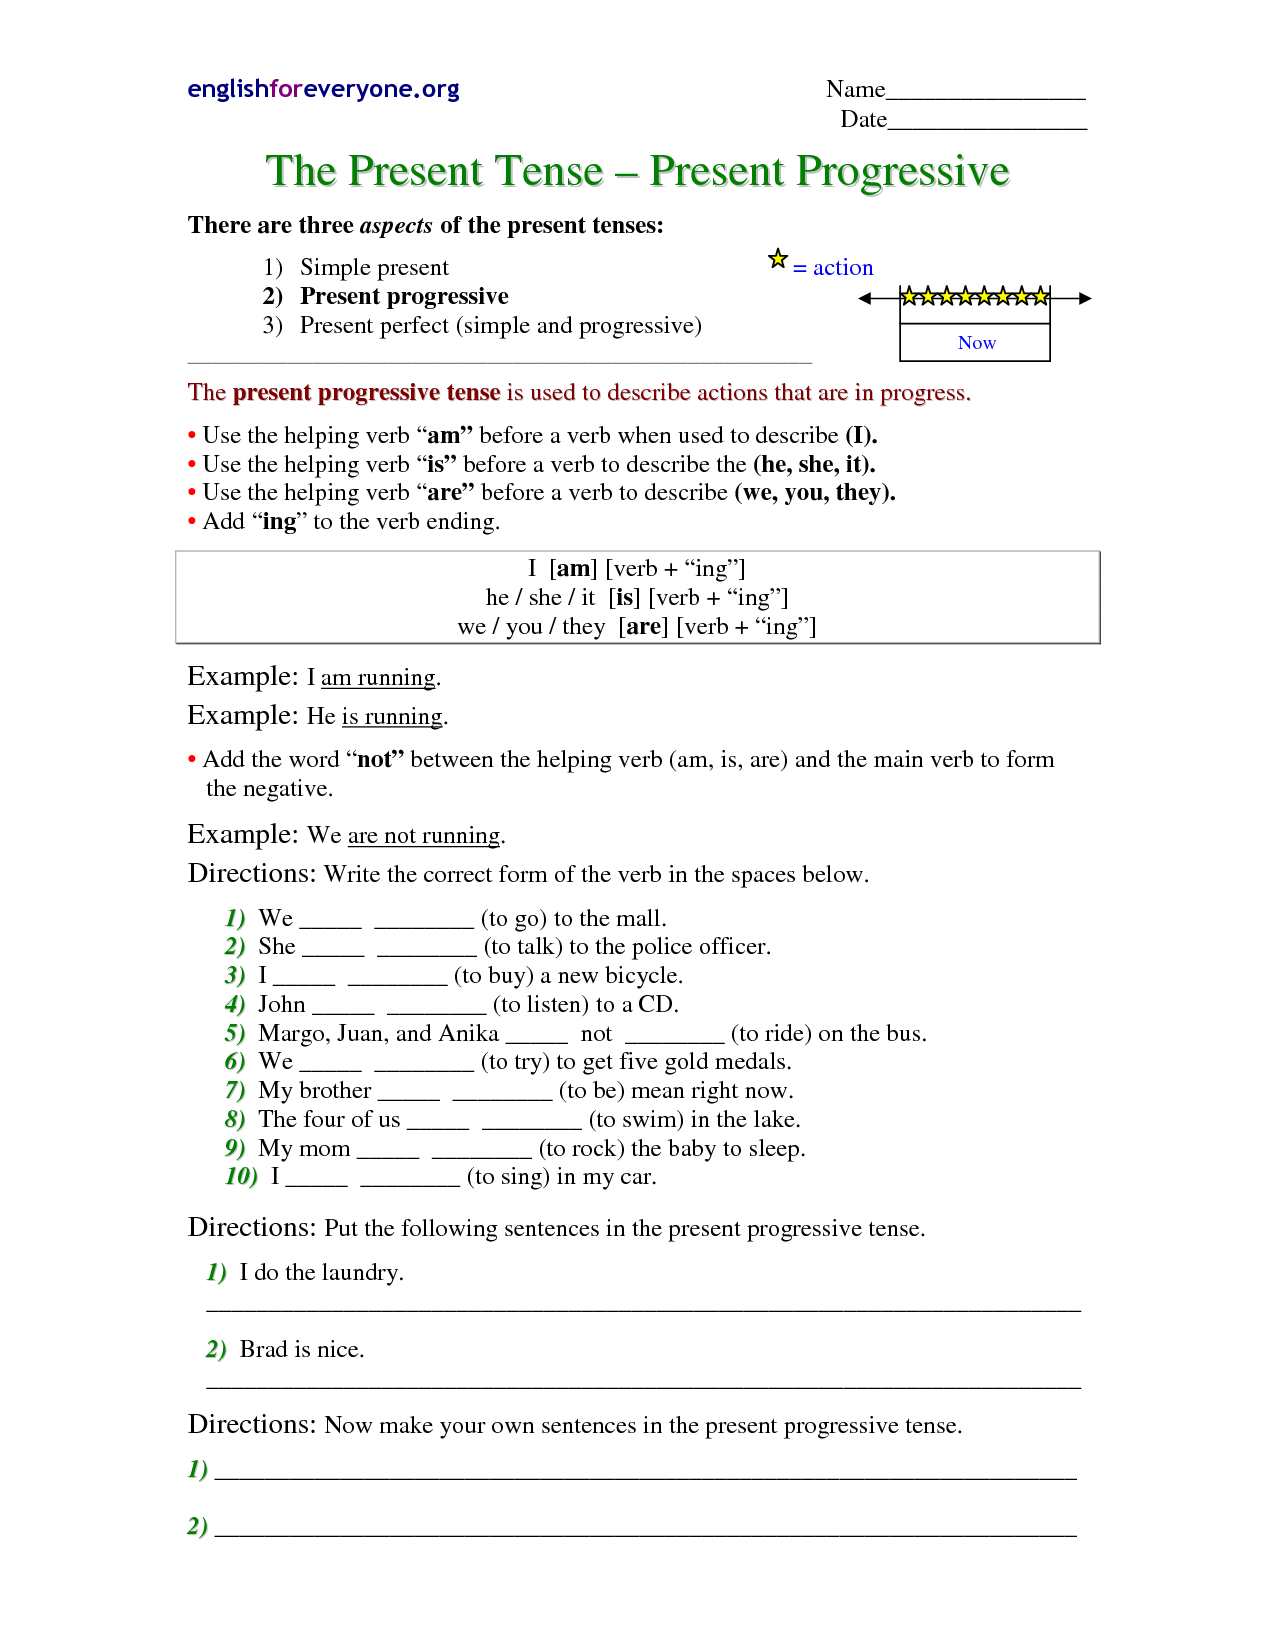 15 Best Images Of Present Progressive ING Worksheets Present Continuous Tense Exercises